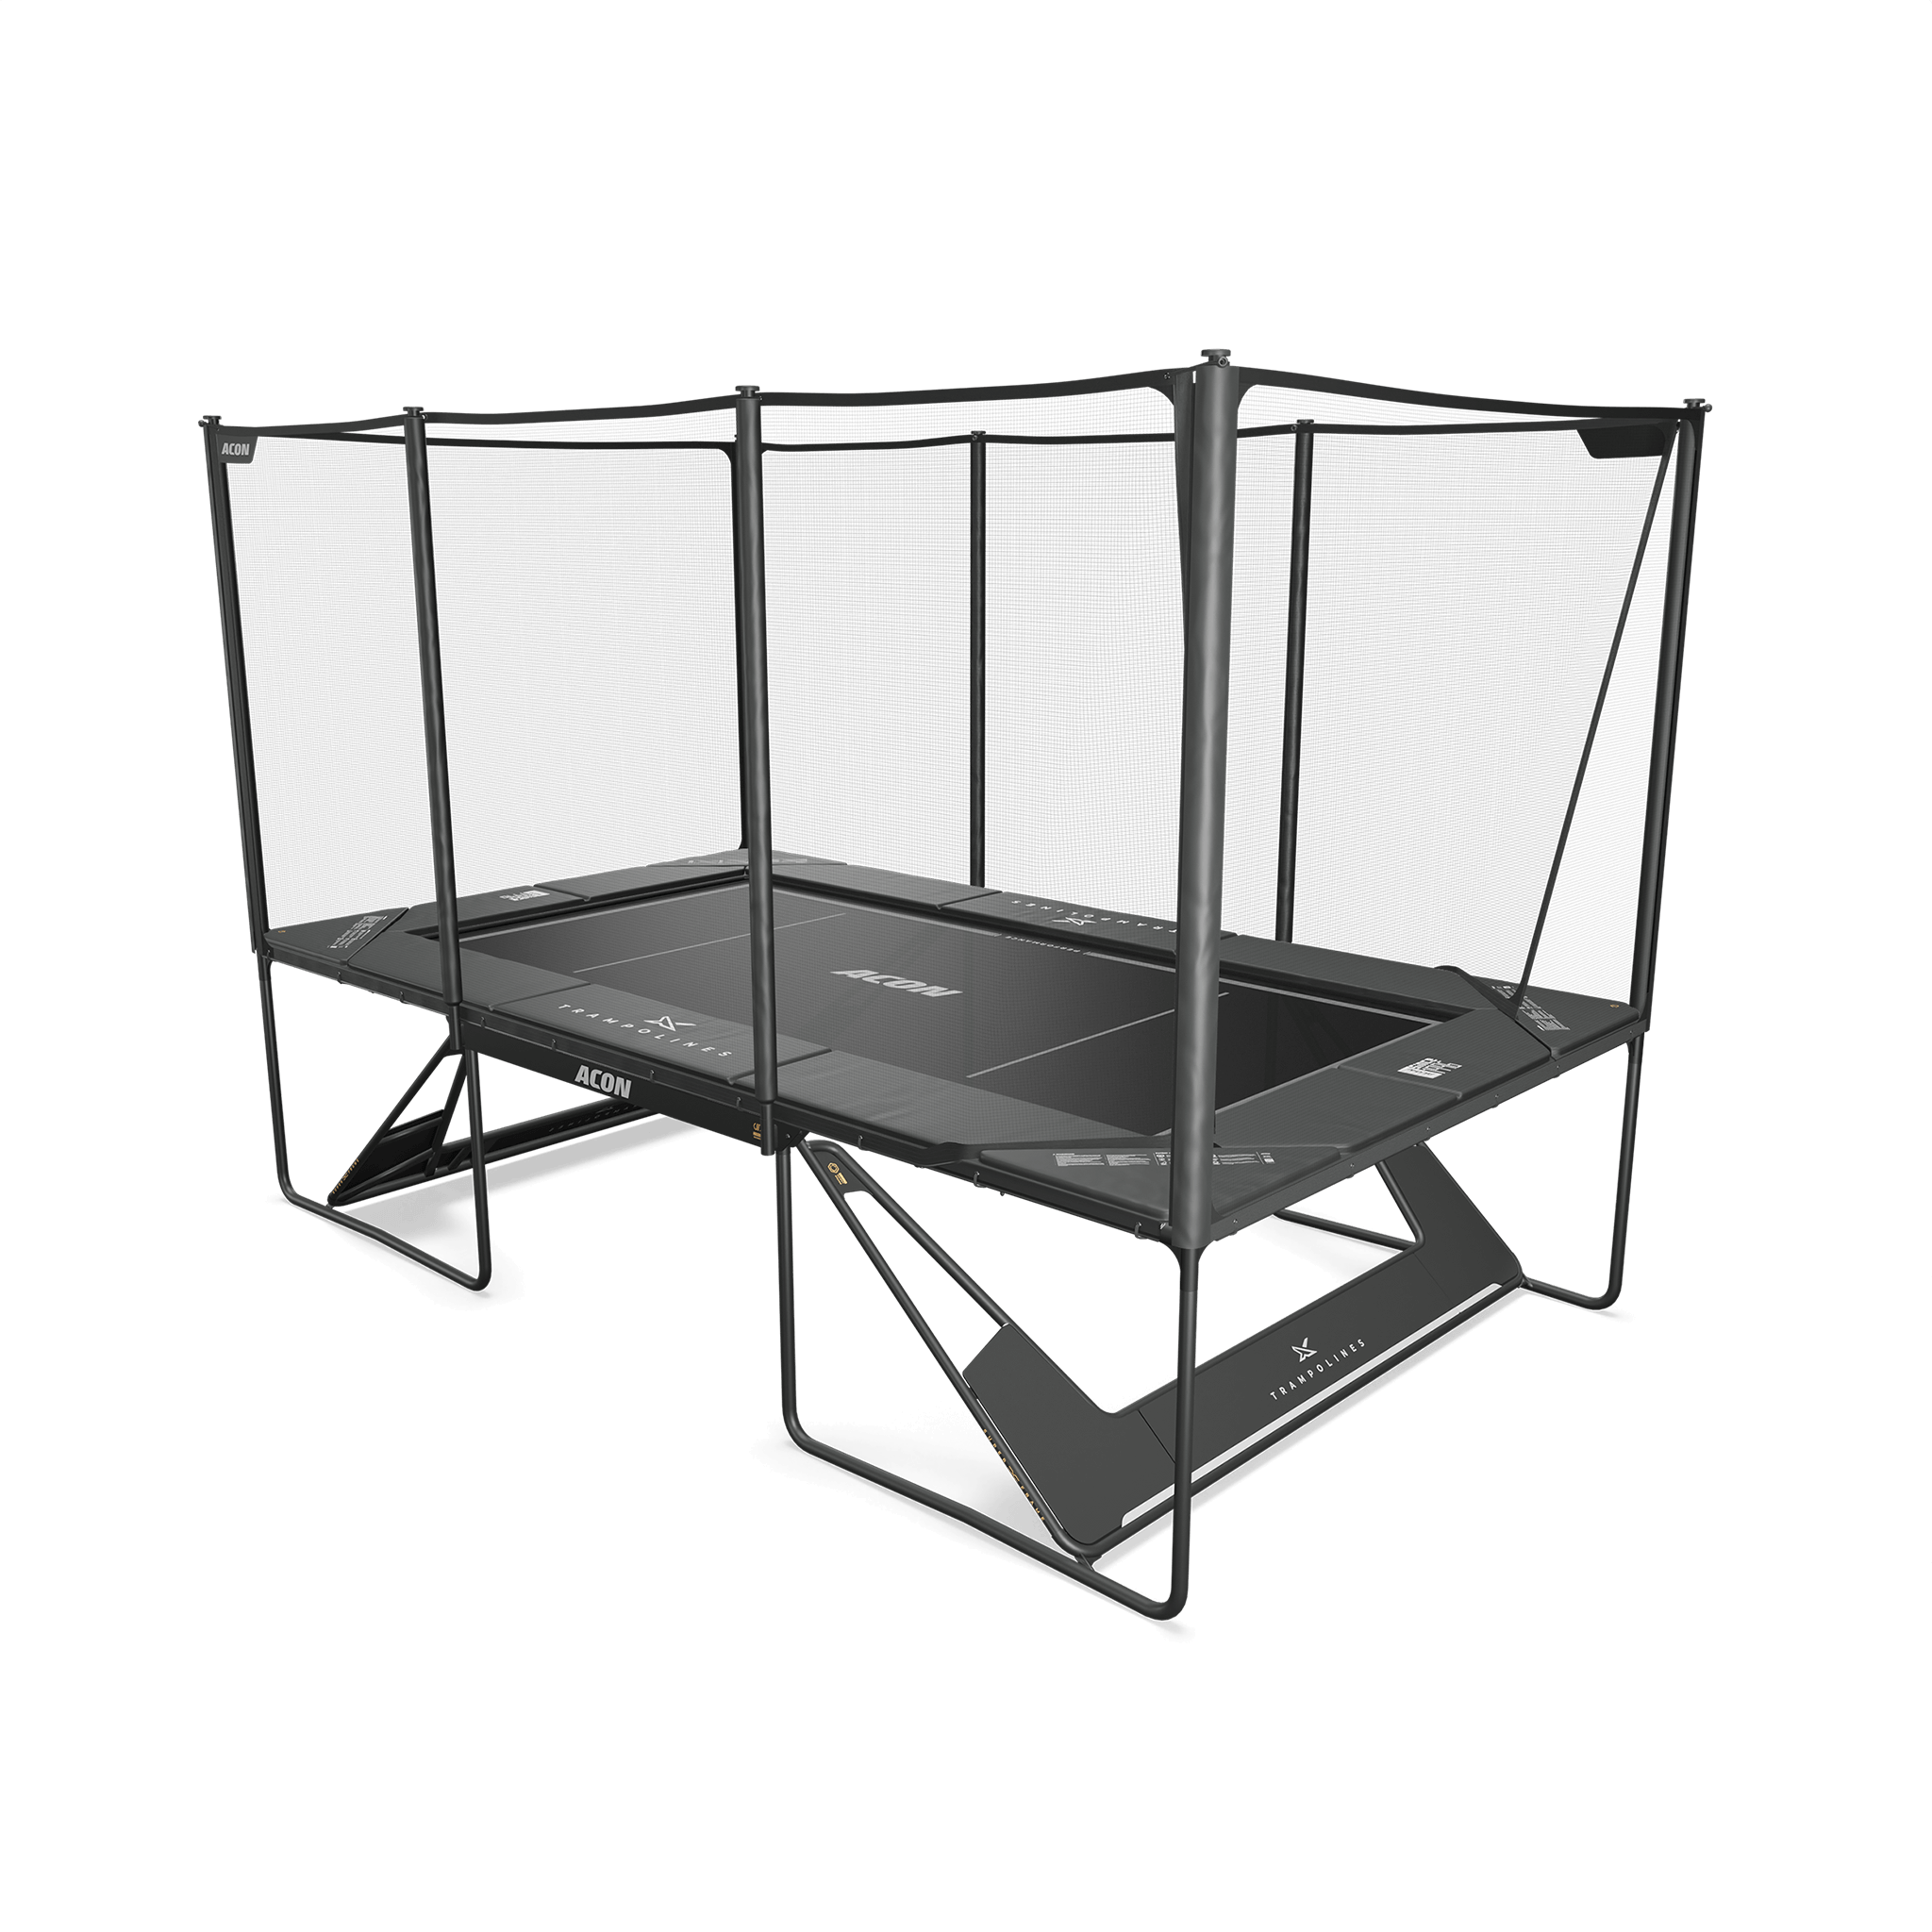 Image of the Performance Mat installed to an Acon X trampoline, Black